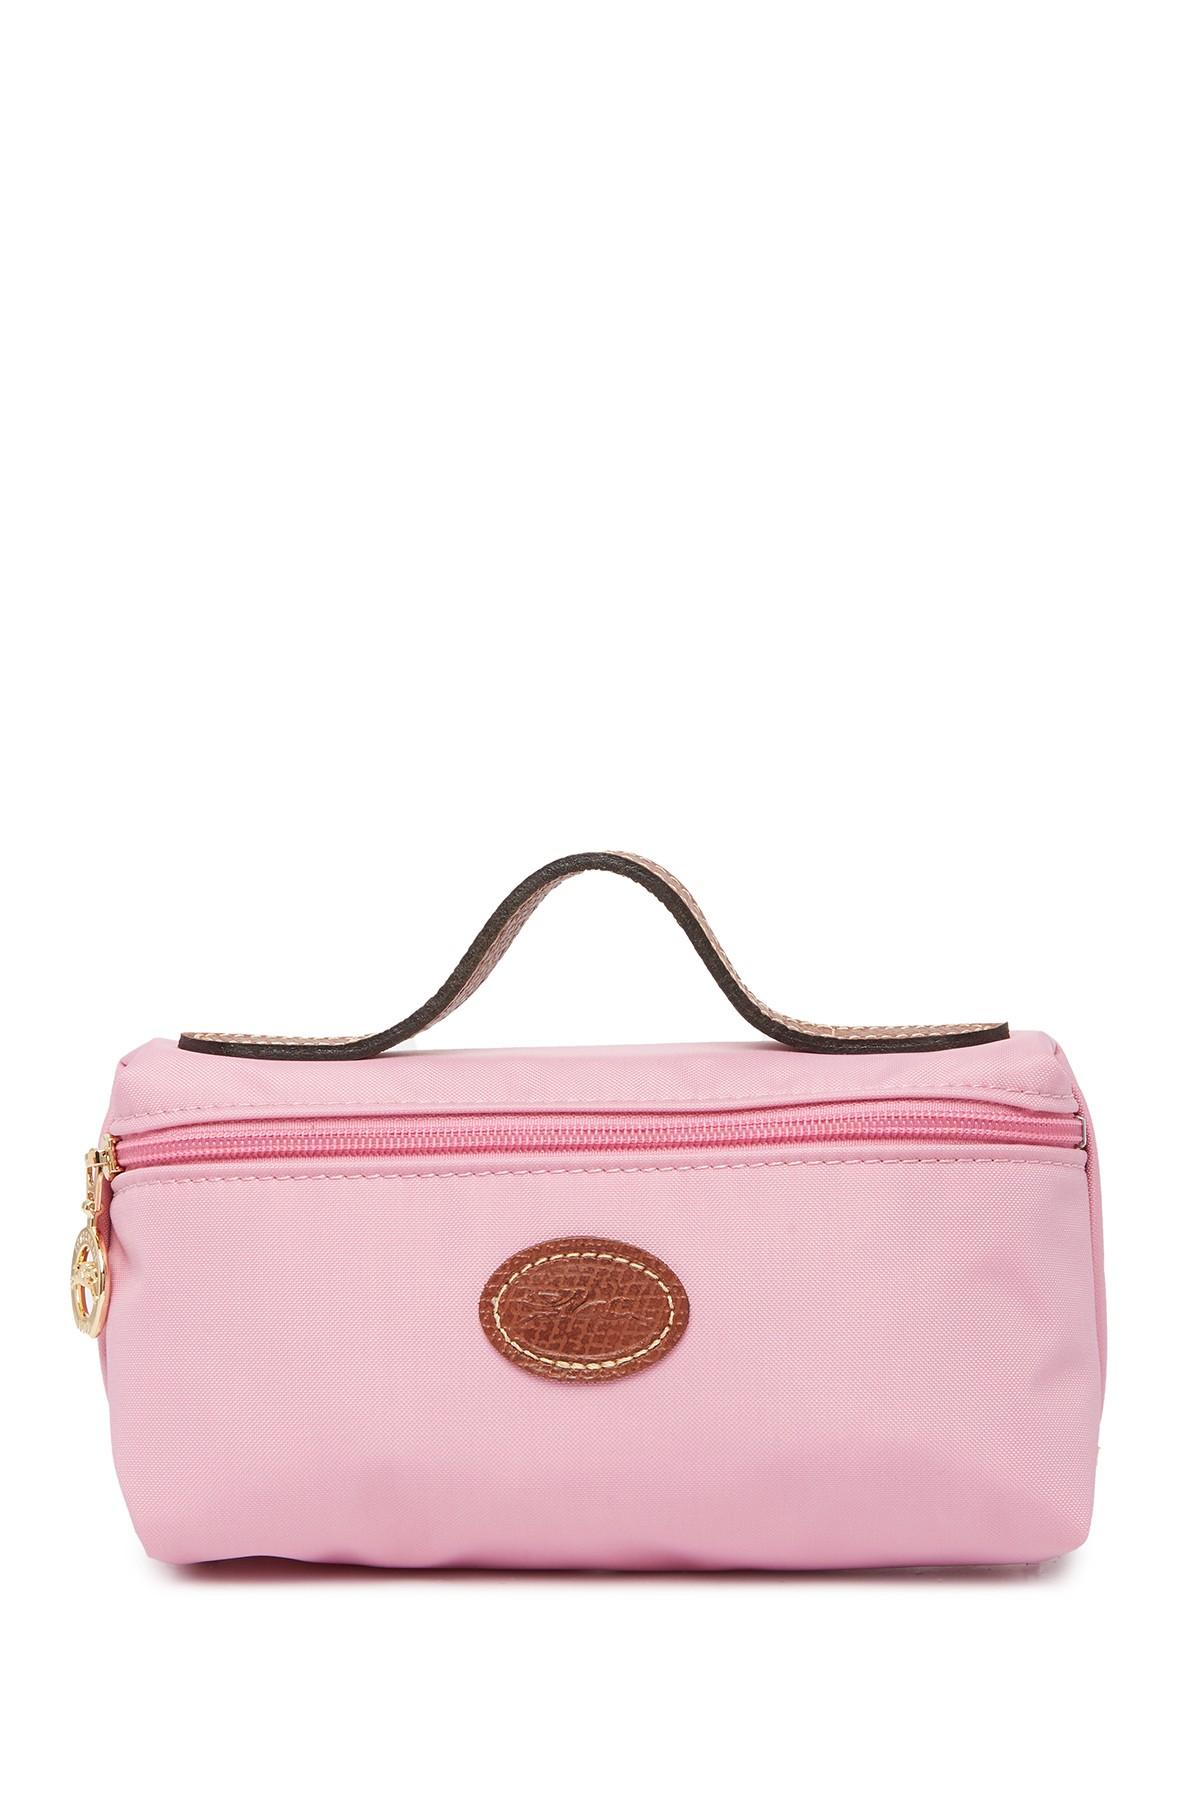 Longchamp Leather Cosmetic Bag - Pink Cosmetic Bags, Accessories - WL867735